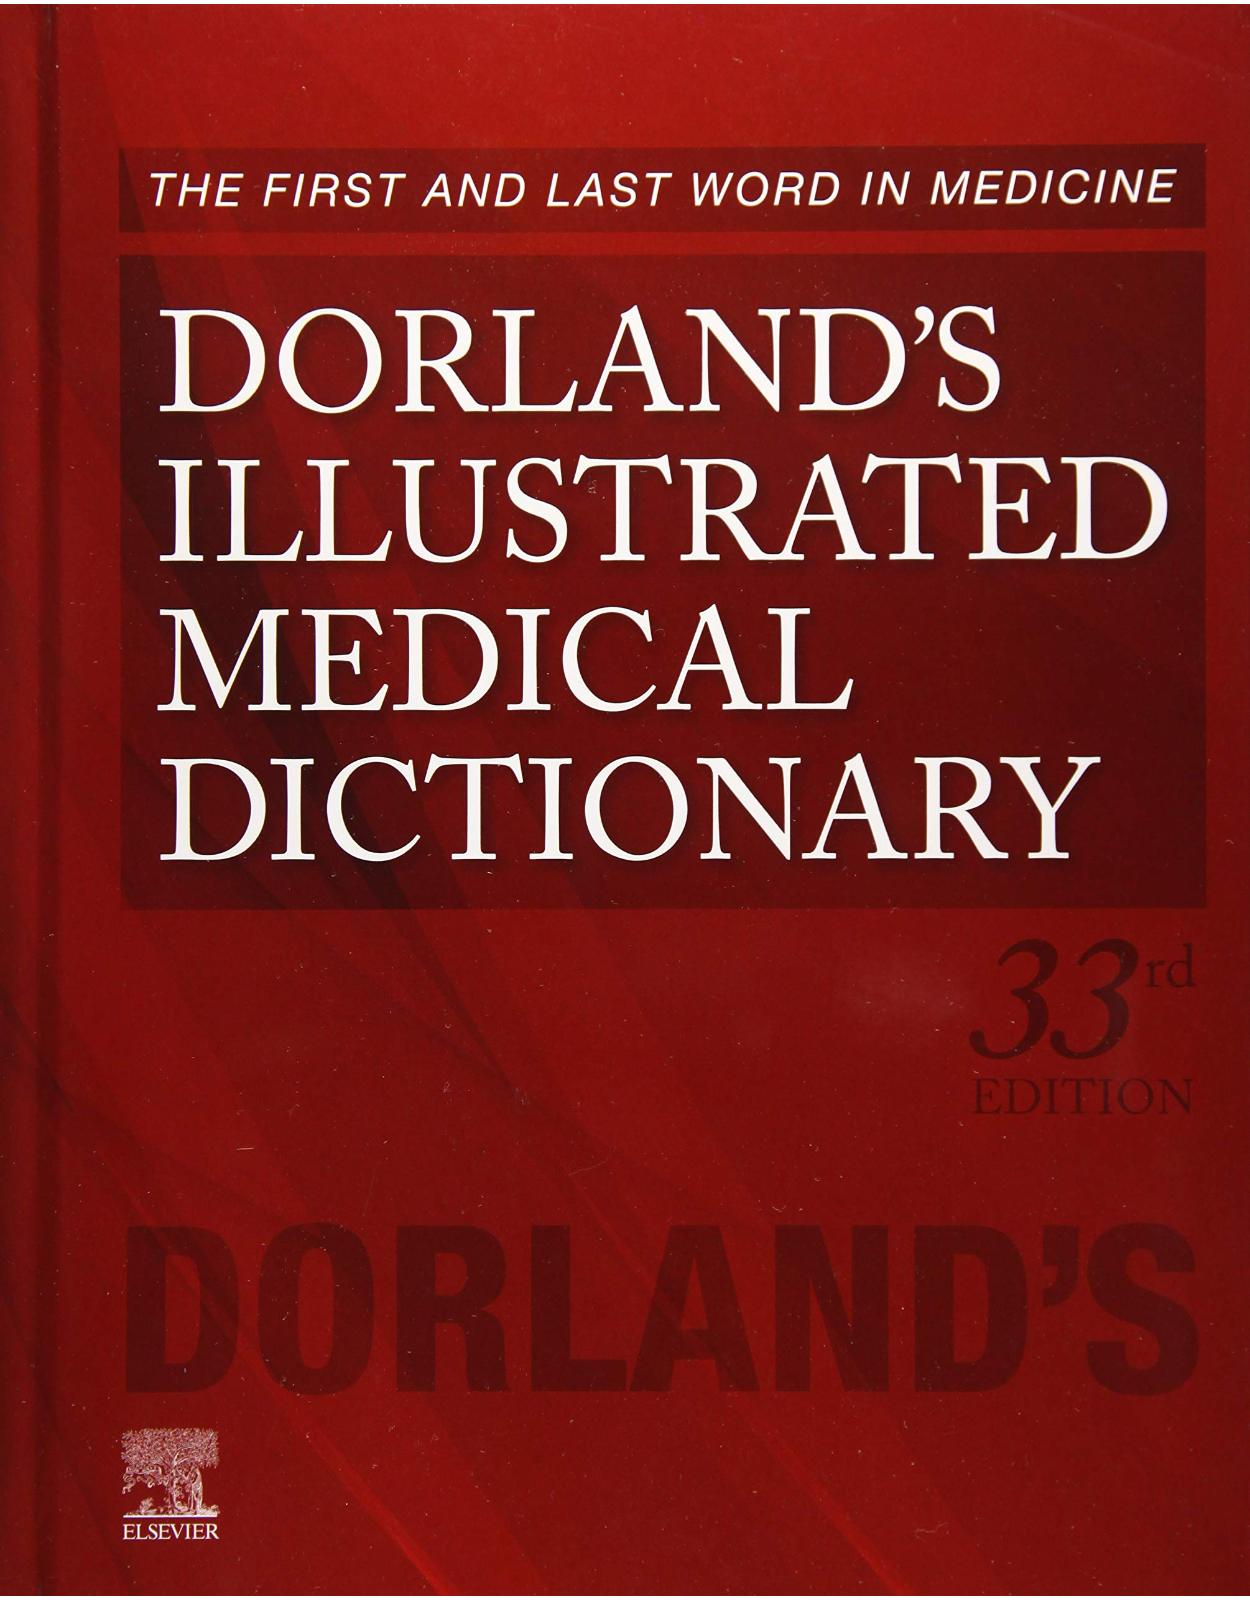 Dorland's Illustrated Medical Dictionary (Dorland's Medical Dictionary) 